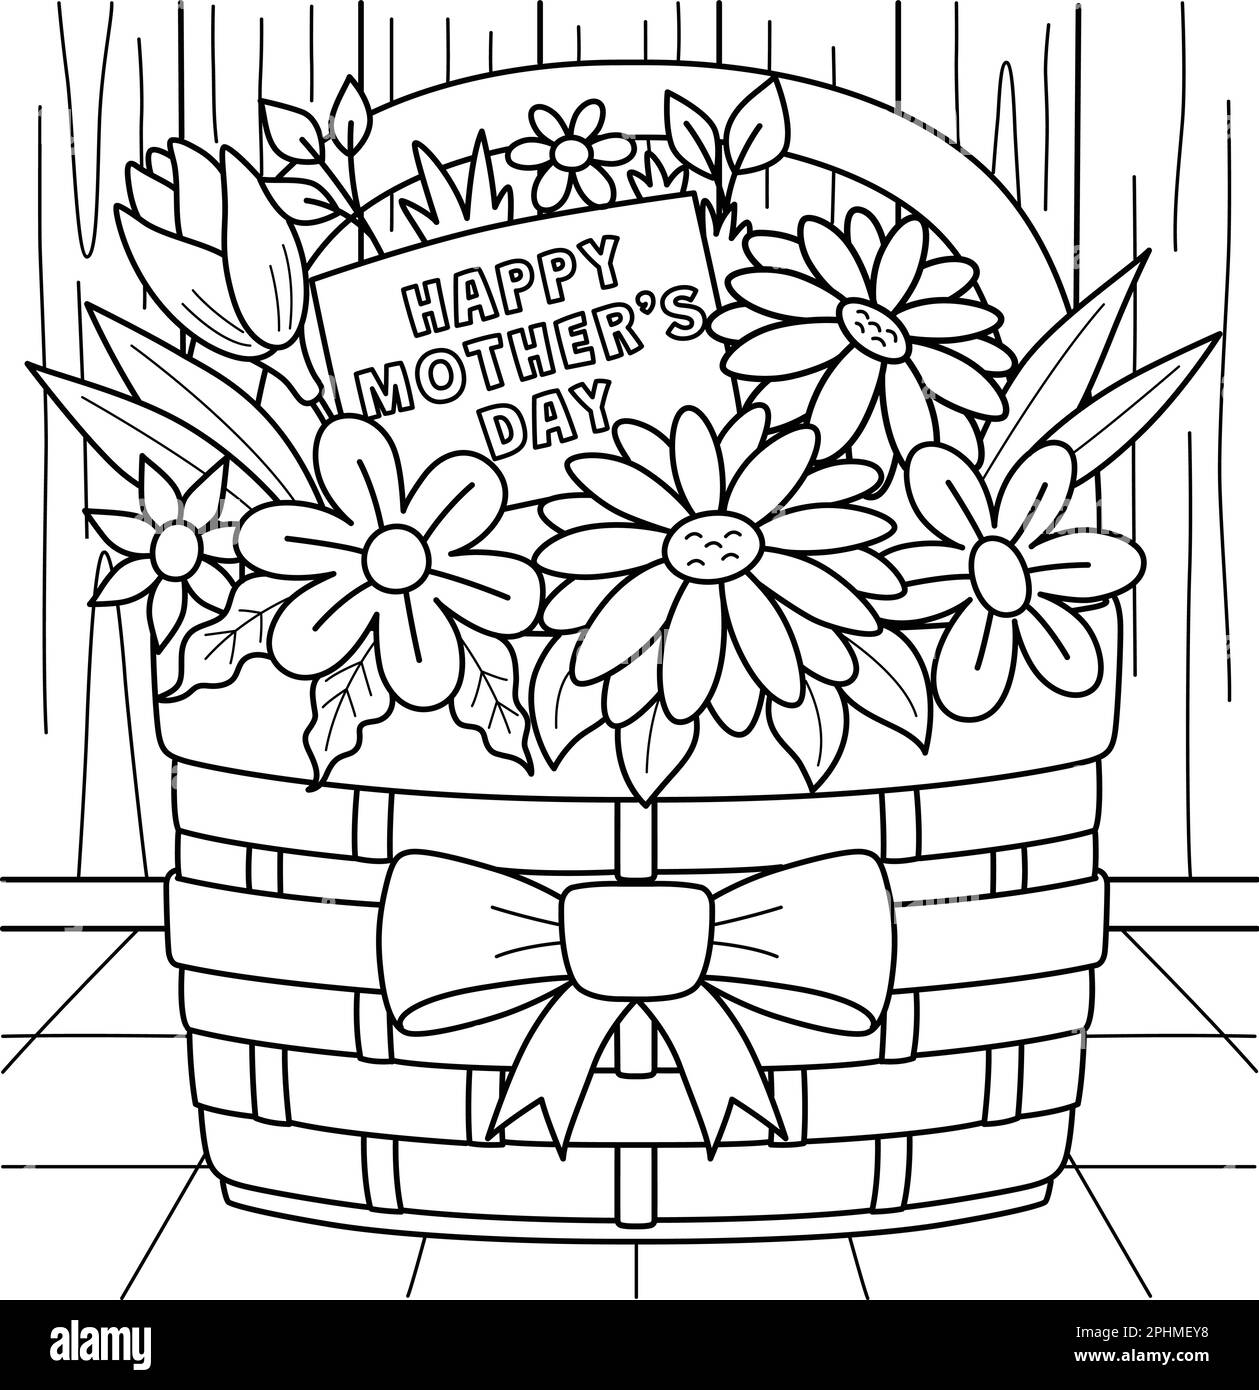 Happy Mothers Day Flower Basket Coloring Page Immagine e Vettoriale - Alamy